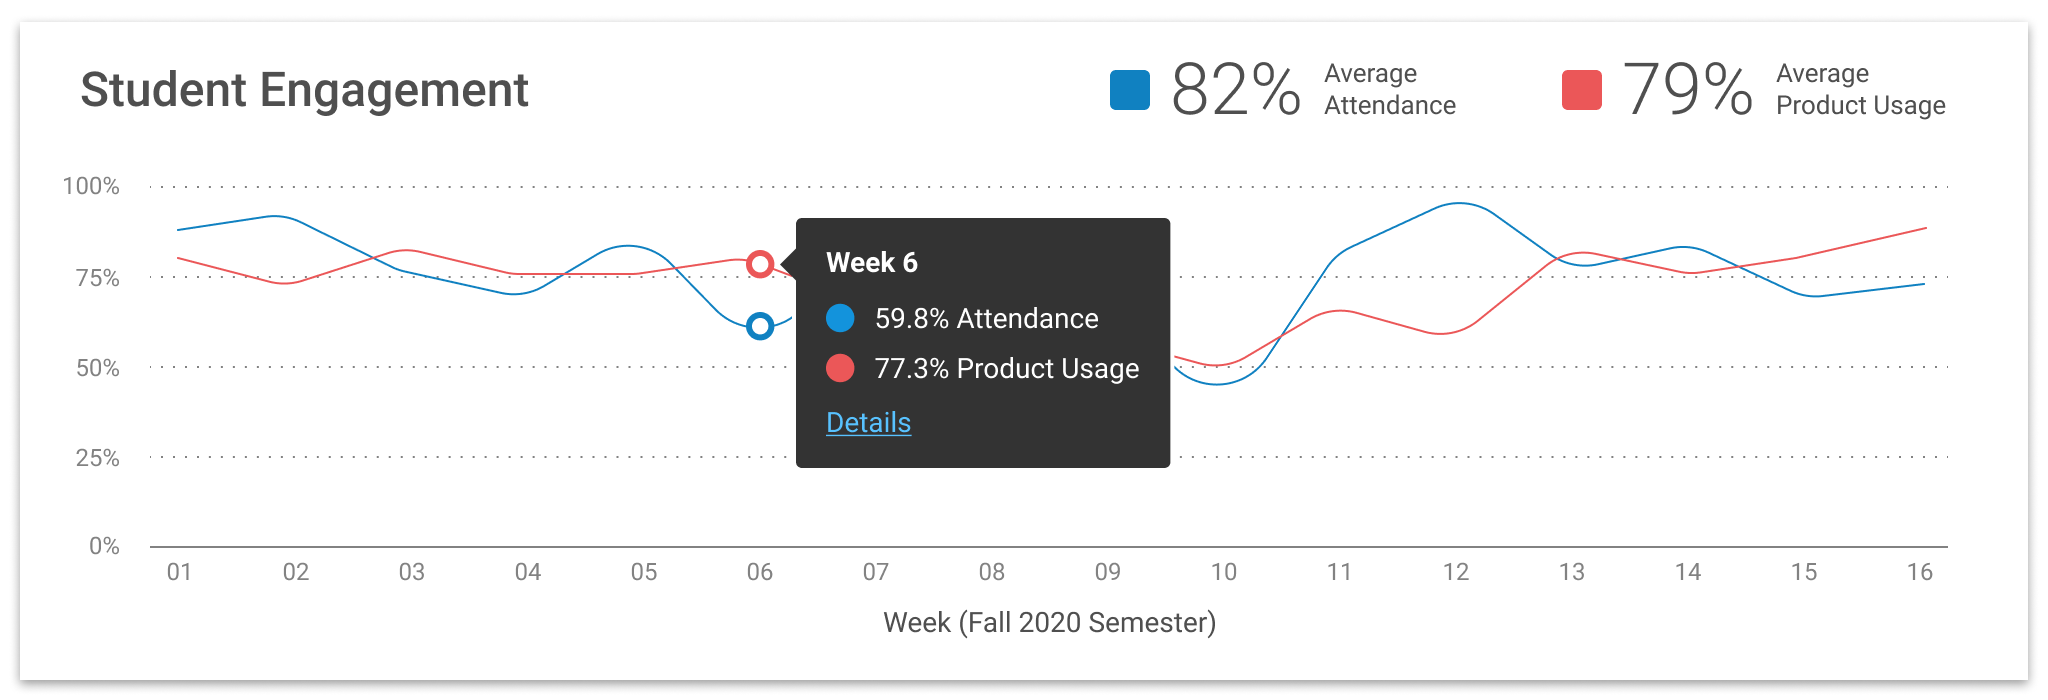 Graphic showing example of data visualization for student engagement in EdTech product